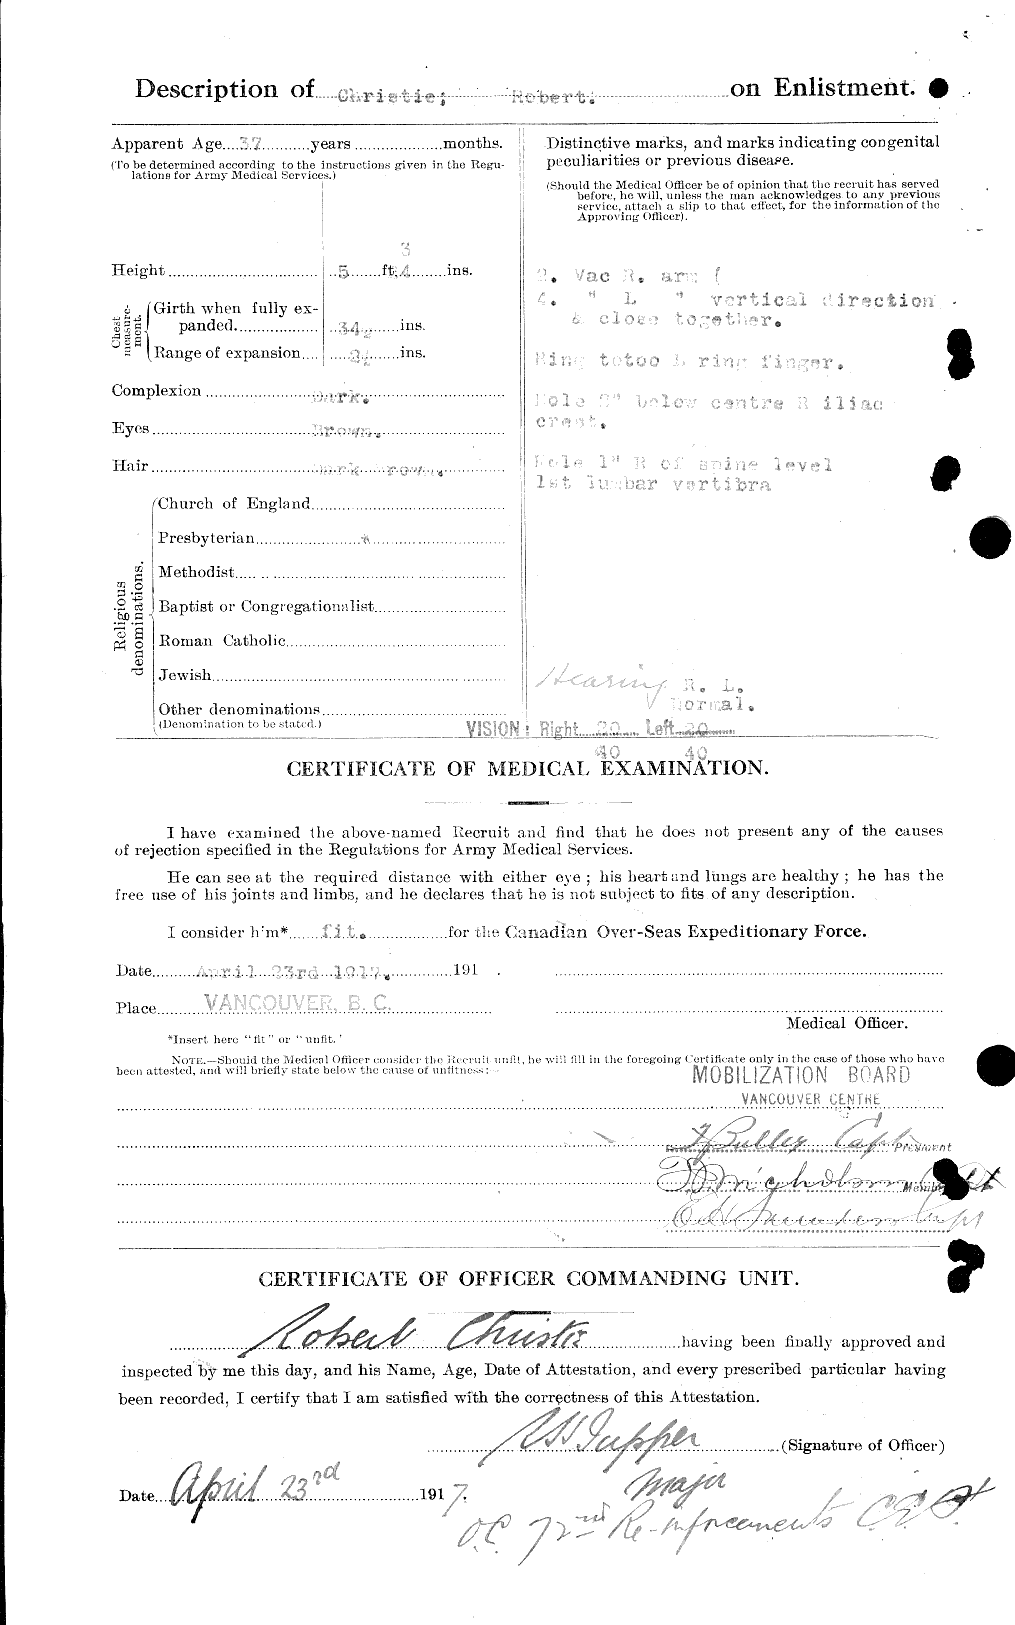 Personnel Records of the First World War - CEF 022053b